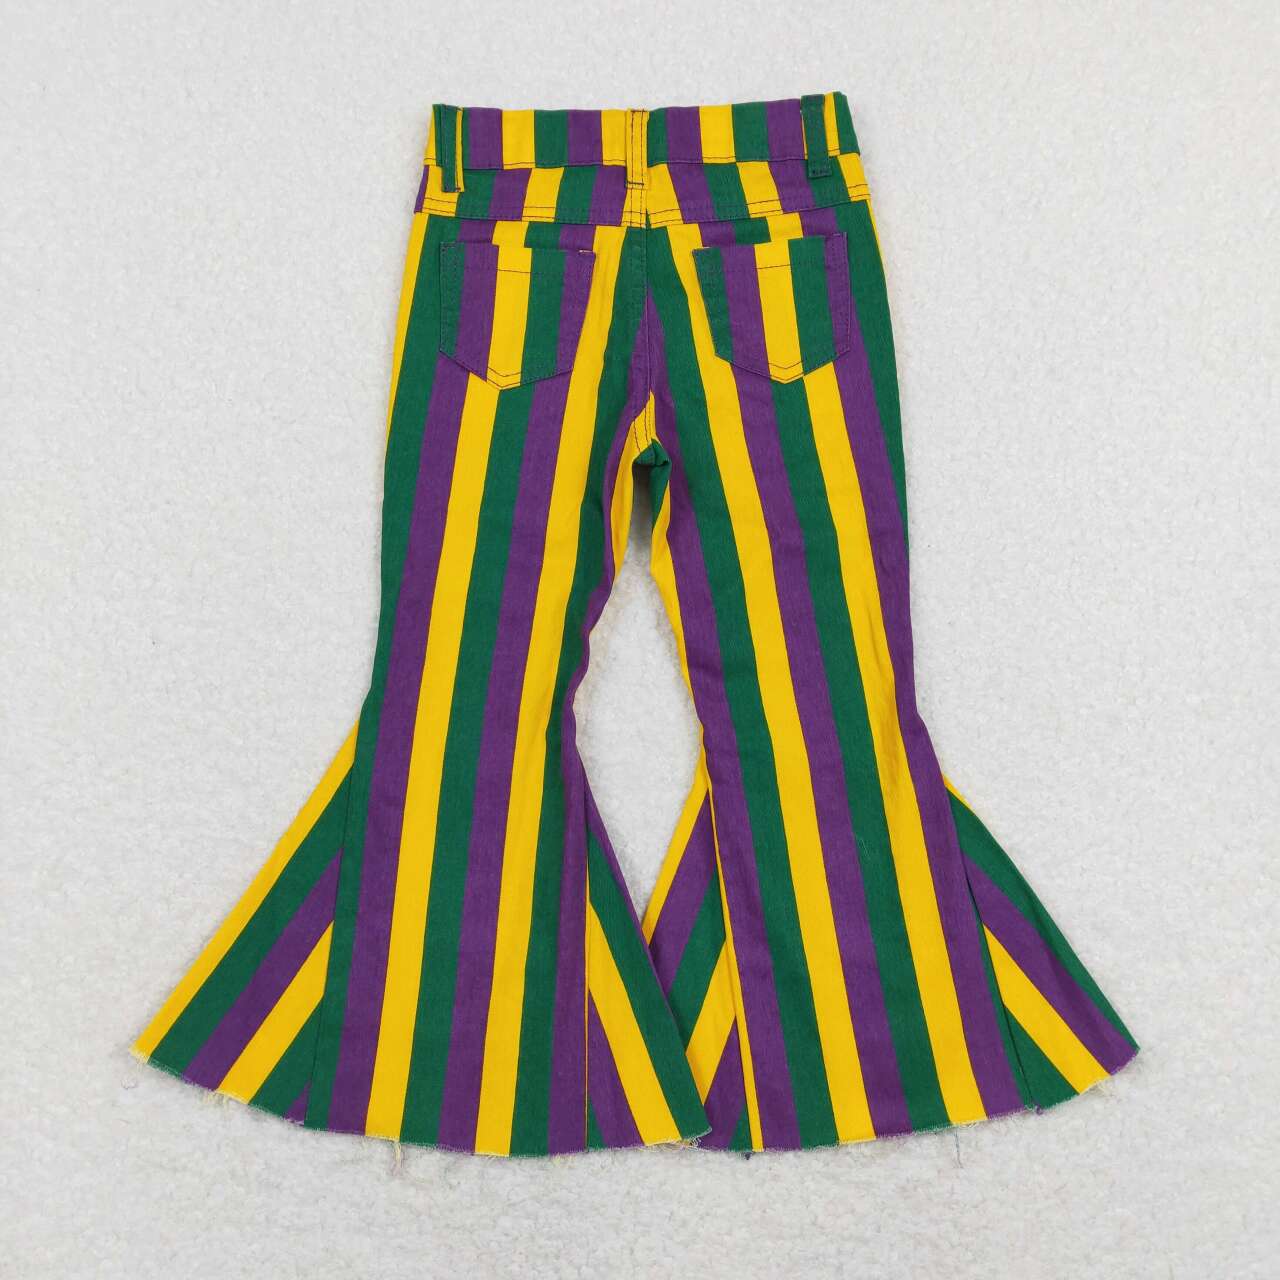 Mommy and Me Matching Jeans- Purple yellow green stripes Denim Bell Bottom Mardi Gras Pants